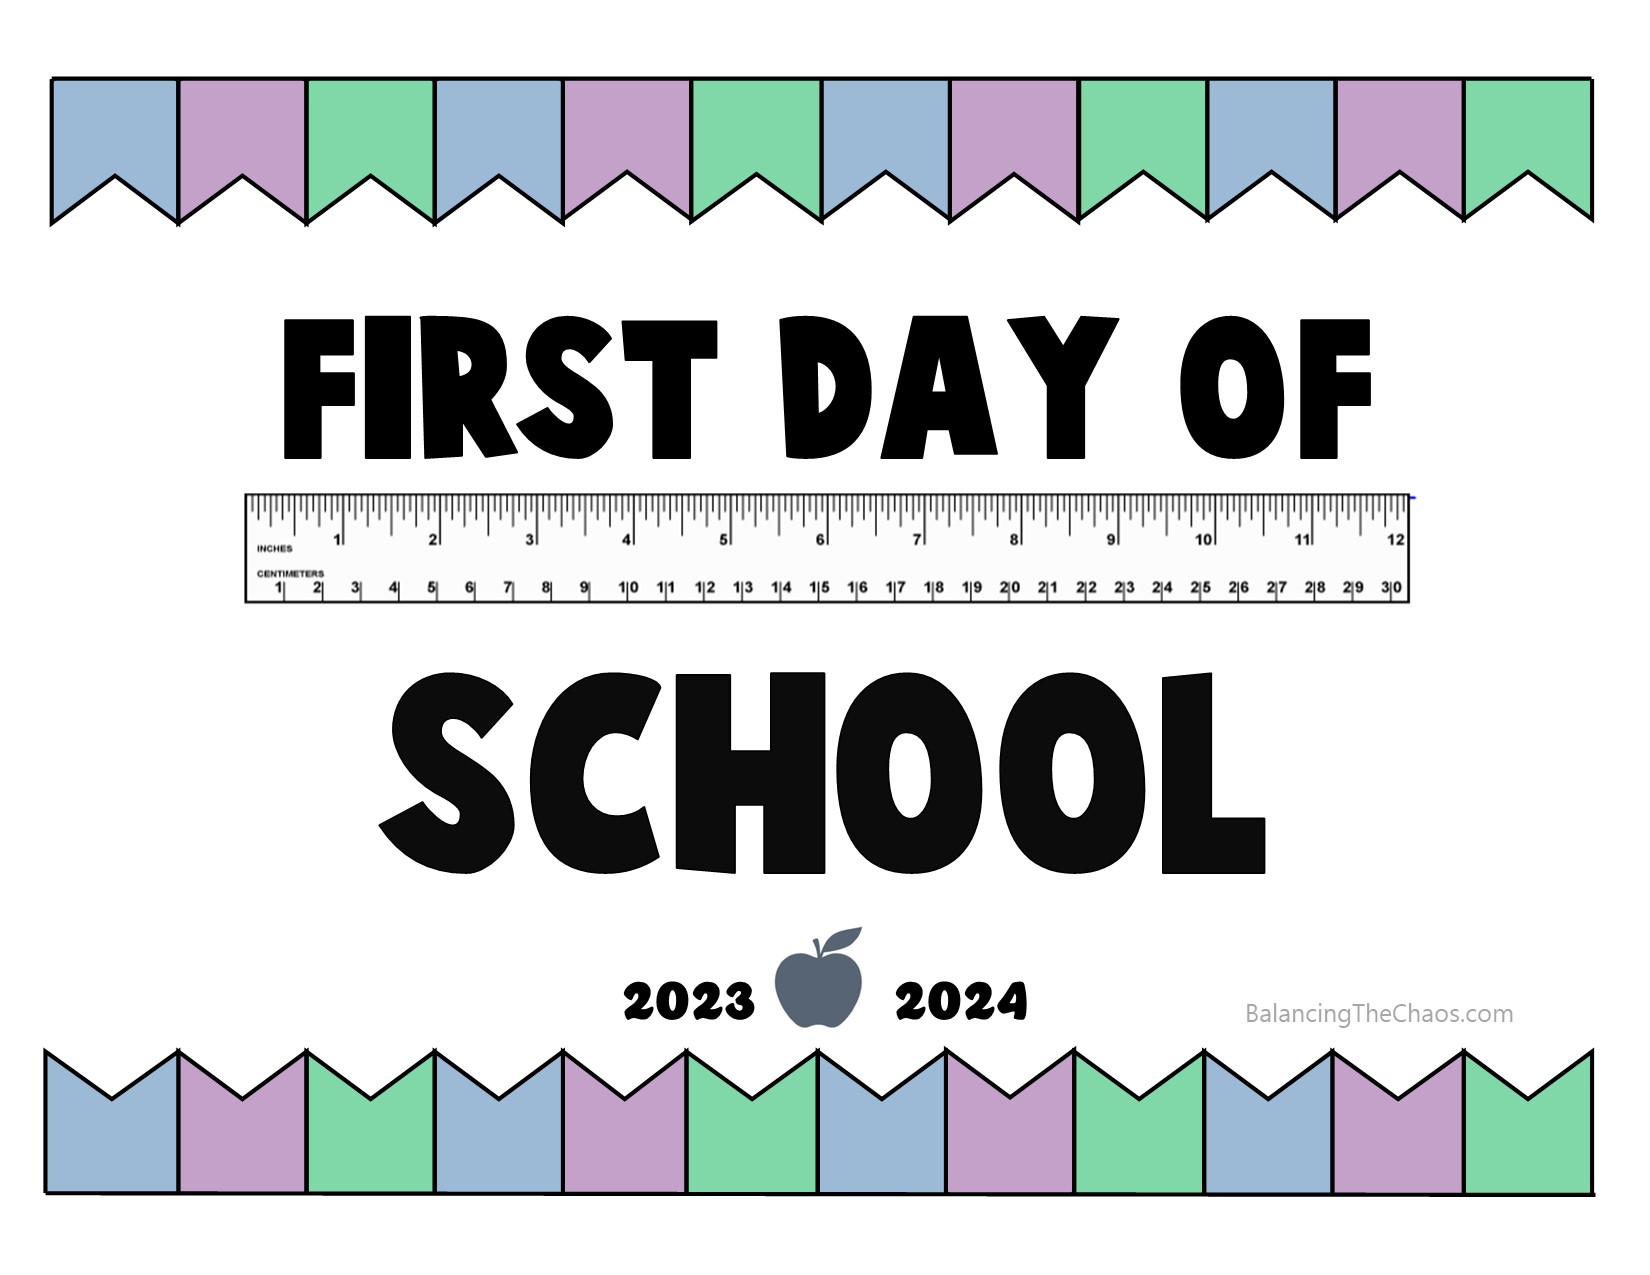 First Day of School Free Printable Signs